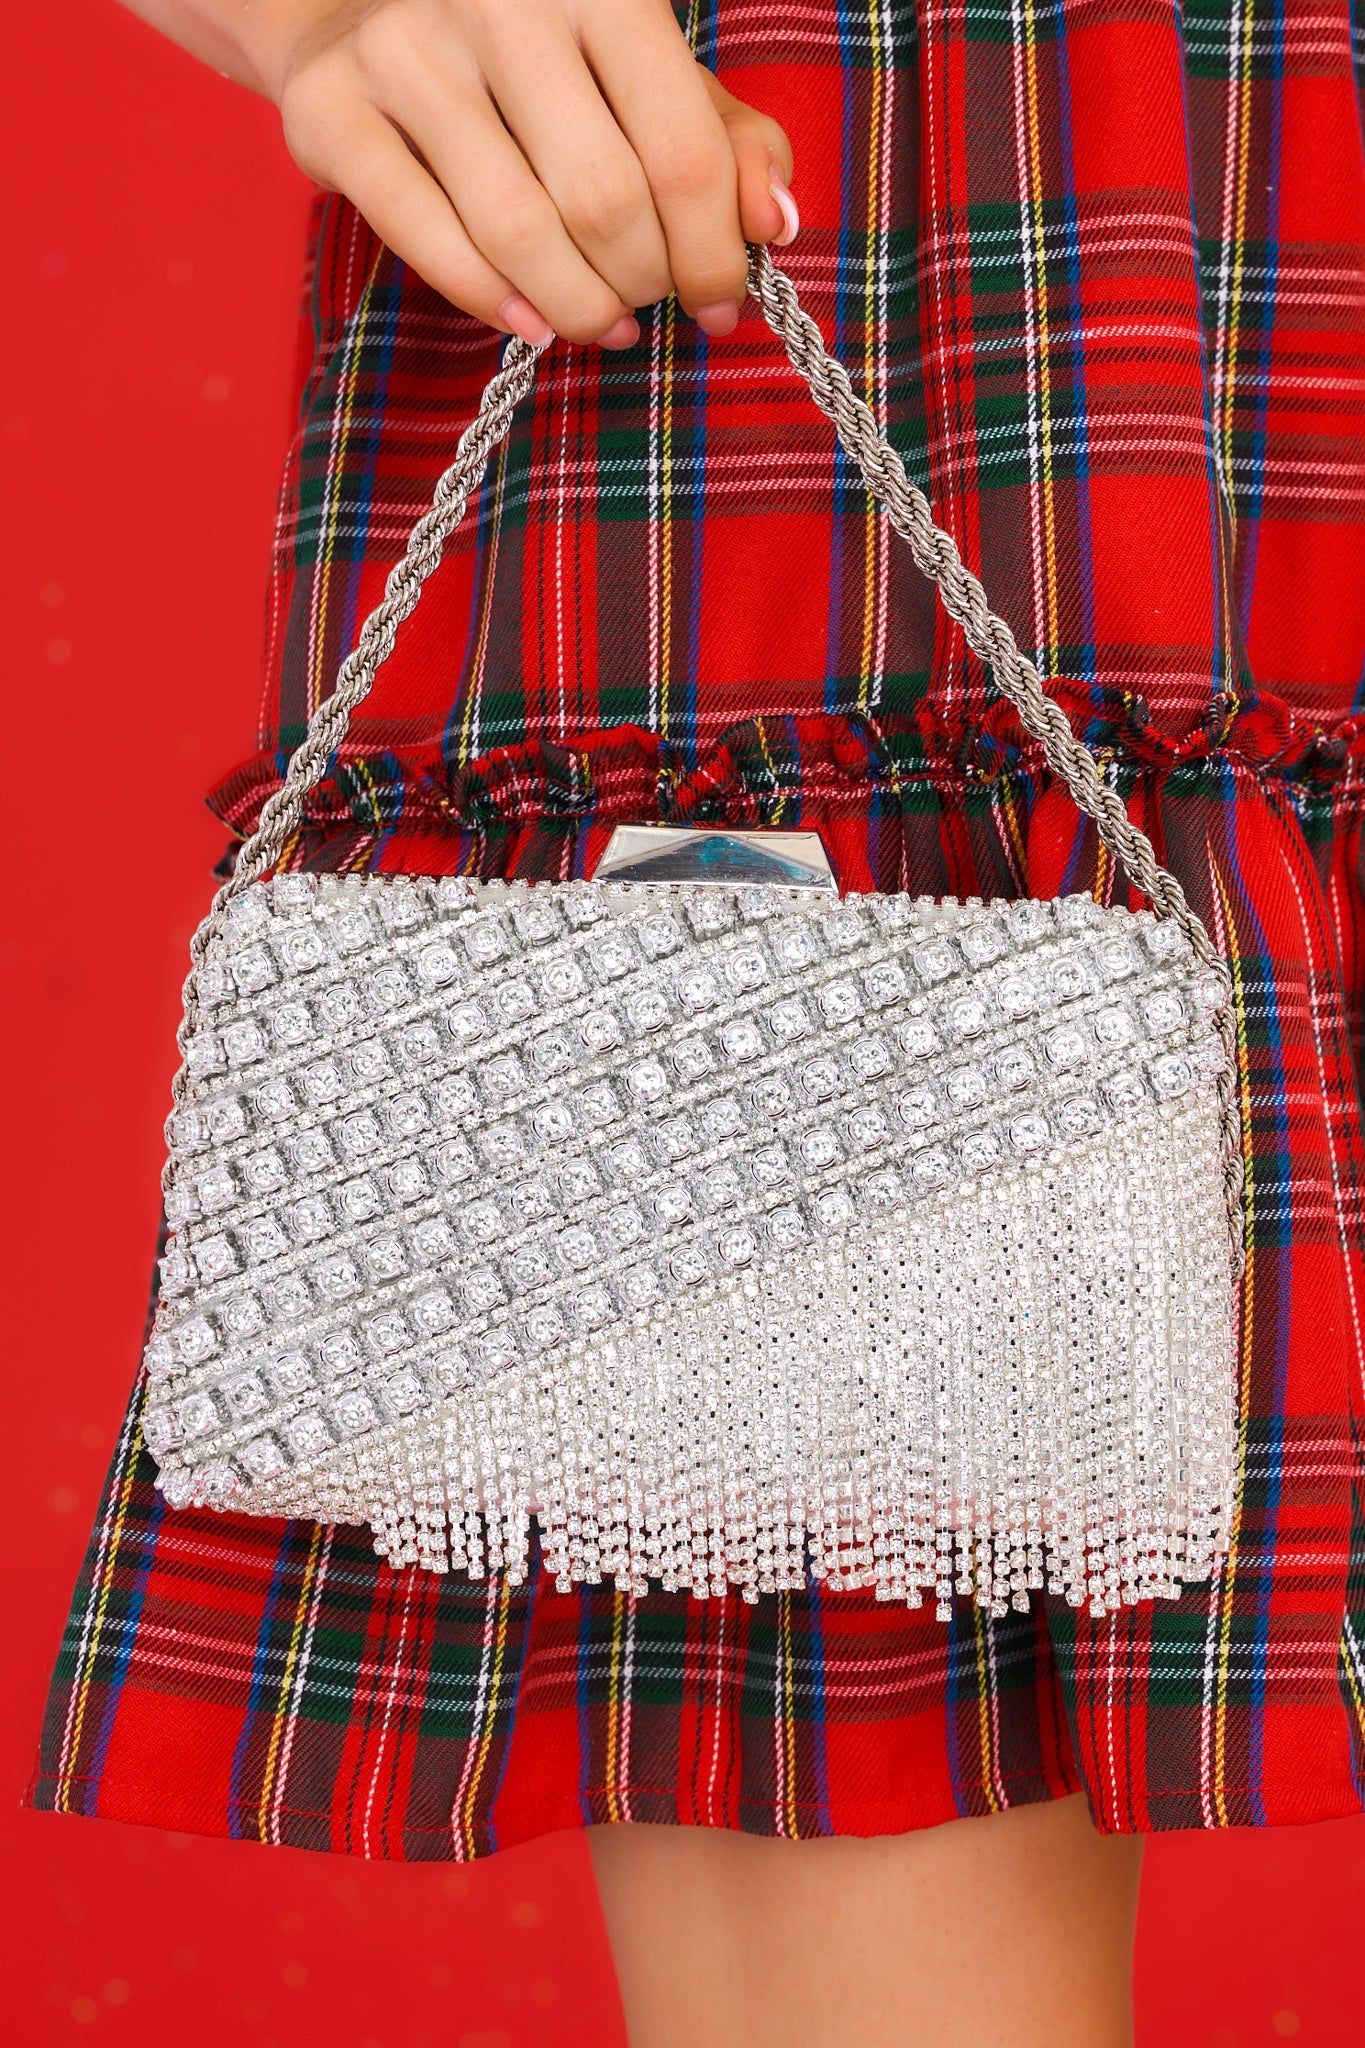 Must Be True Silver Bag | Red Dress 